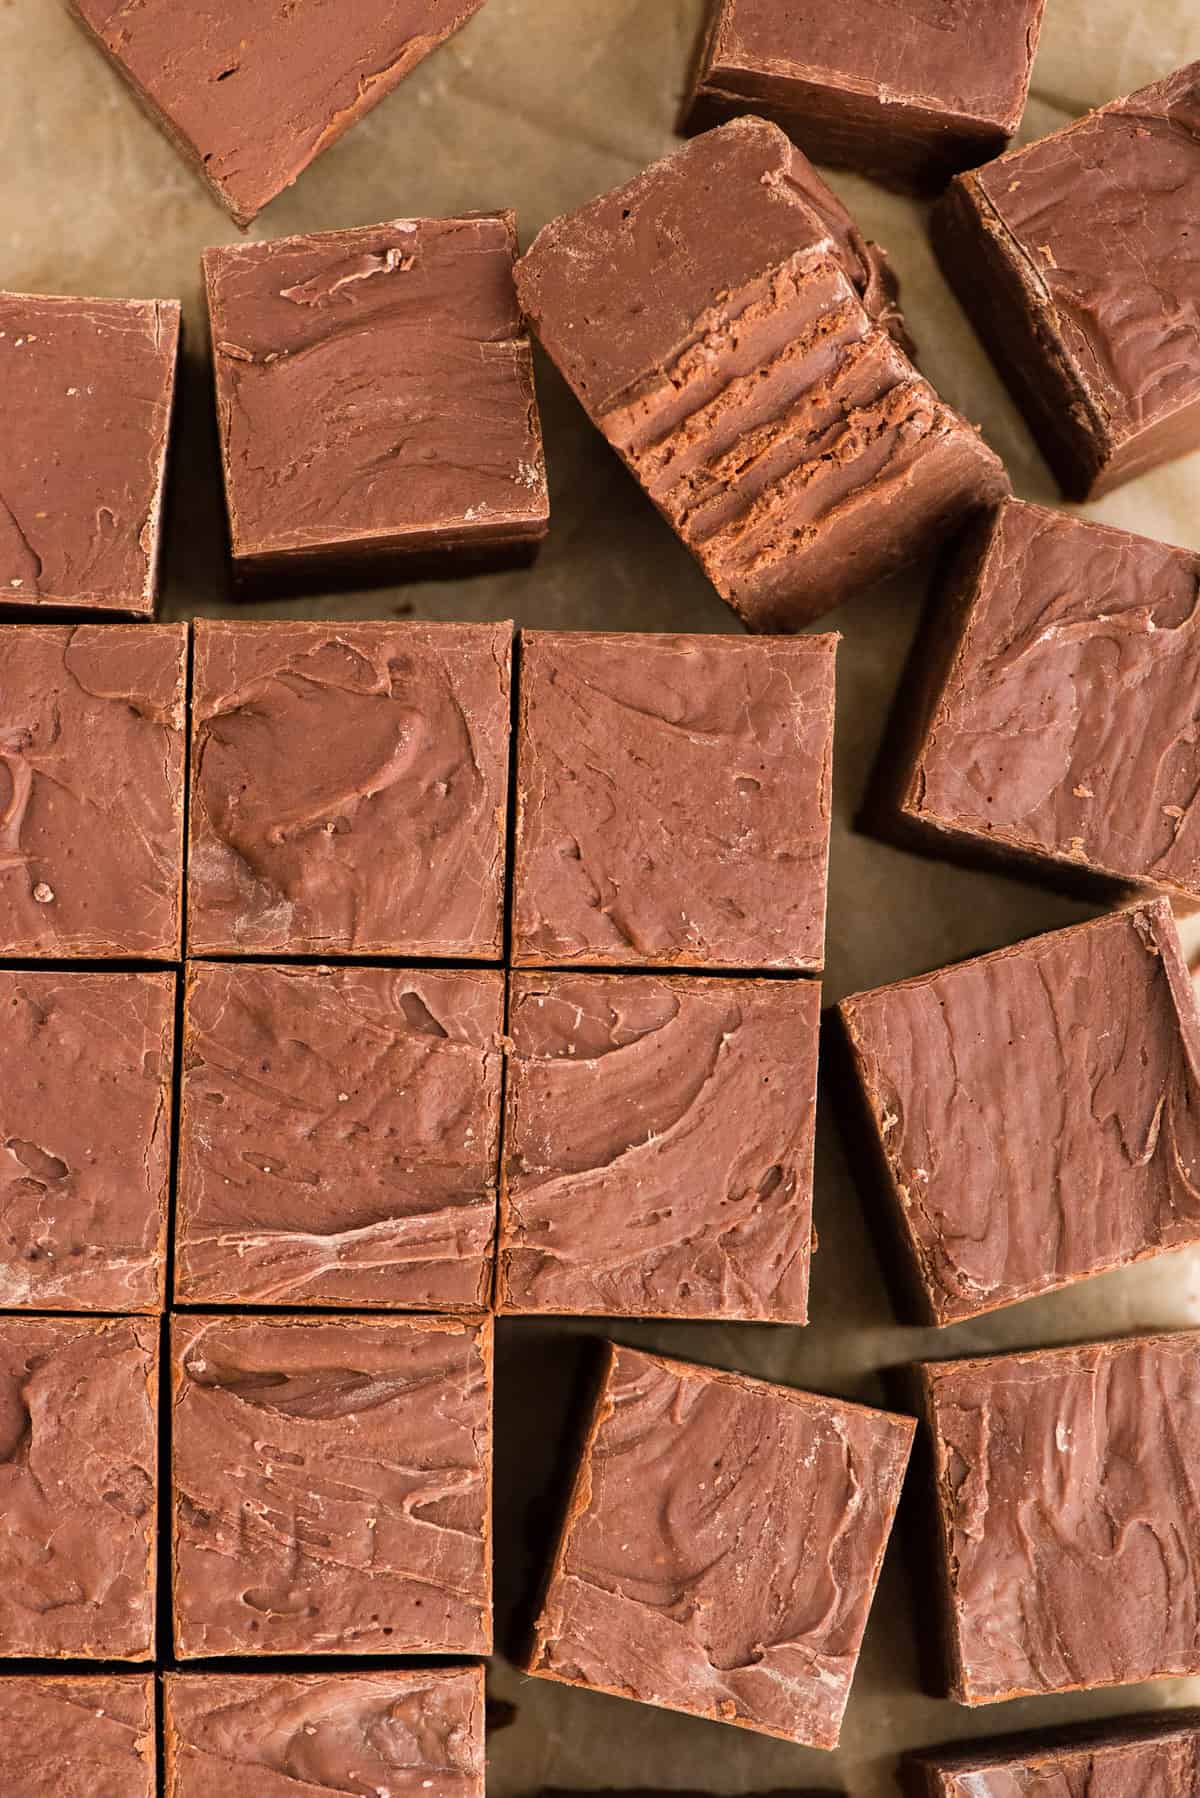 chocolate fudge cut into squares arranged in grid pattern on brown parchment paper